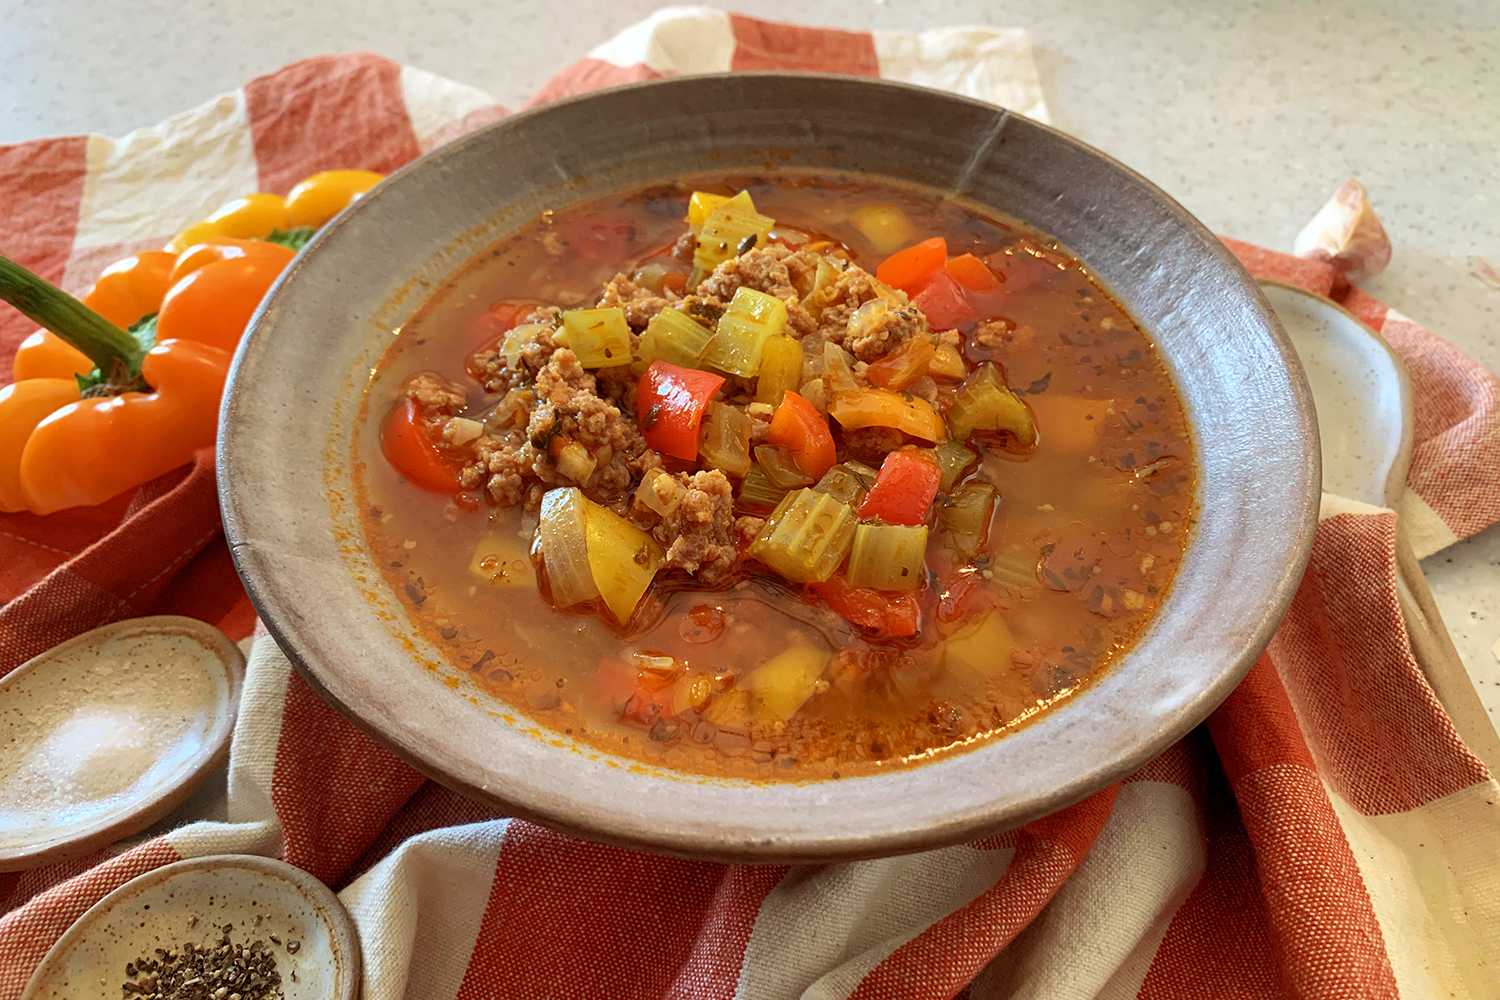 Red soup filled with ground beef, orange and red bell peppers, chopped onion and chopped celery